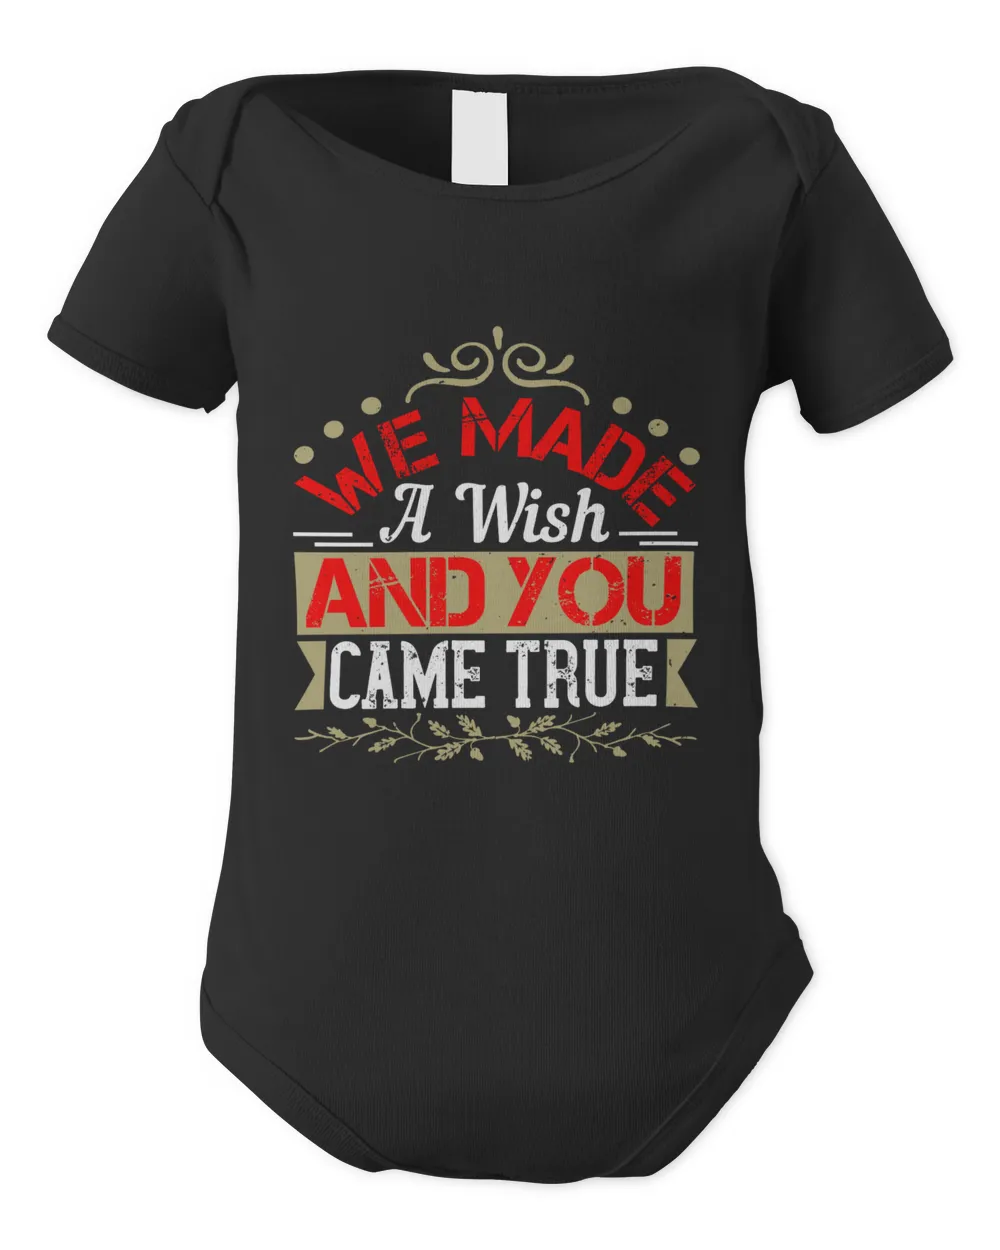 We Made A Wish, And You Came True Baby Shirt, Gift For Family, Toddler T Shirt, Baby Bodysuit